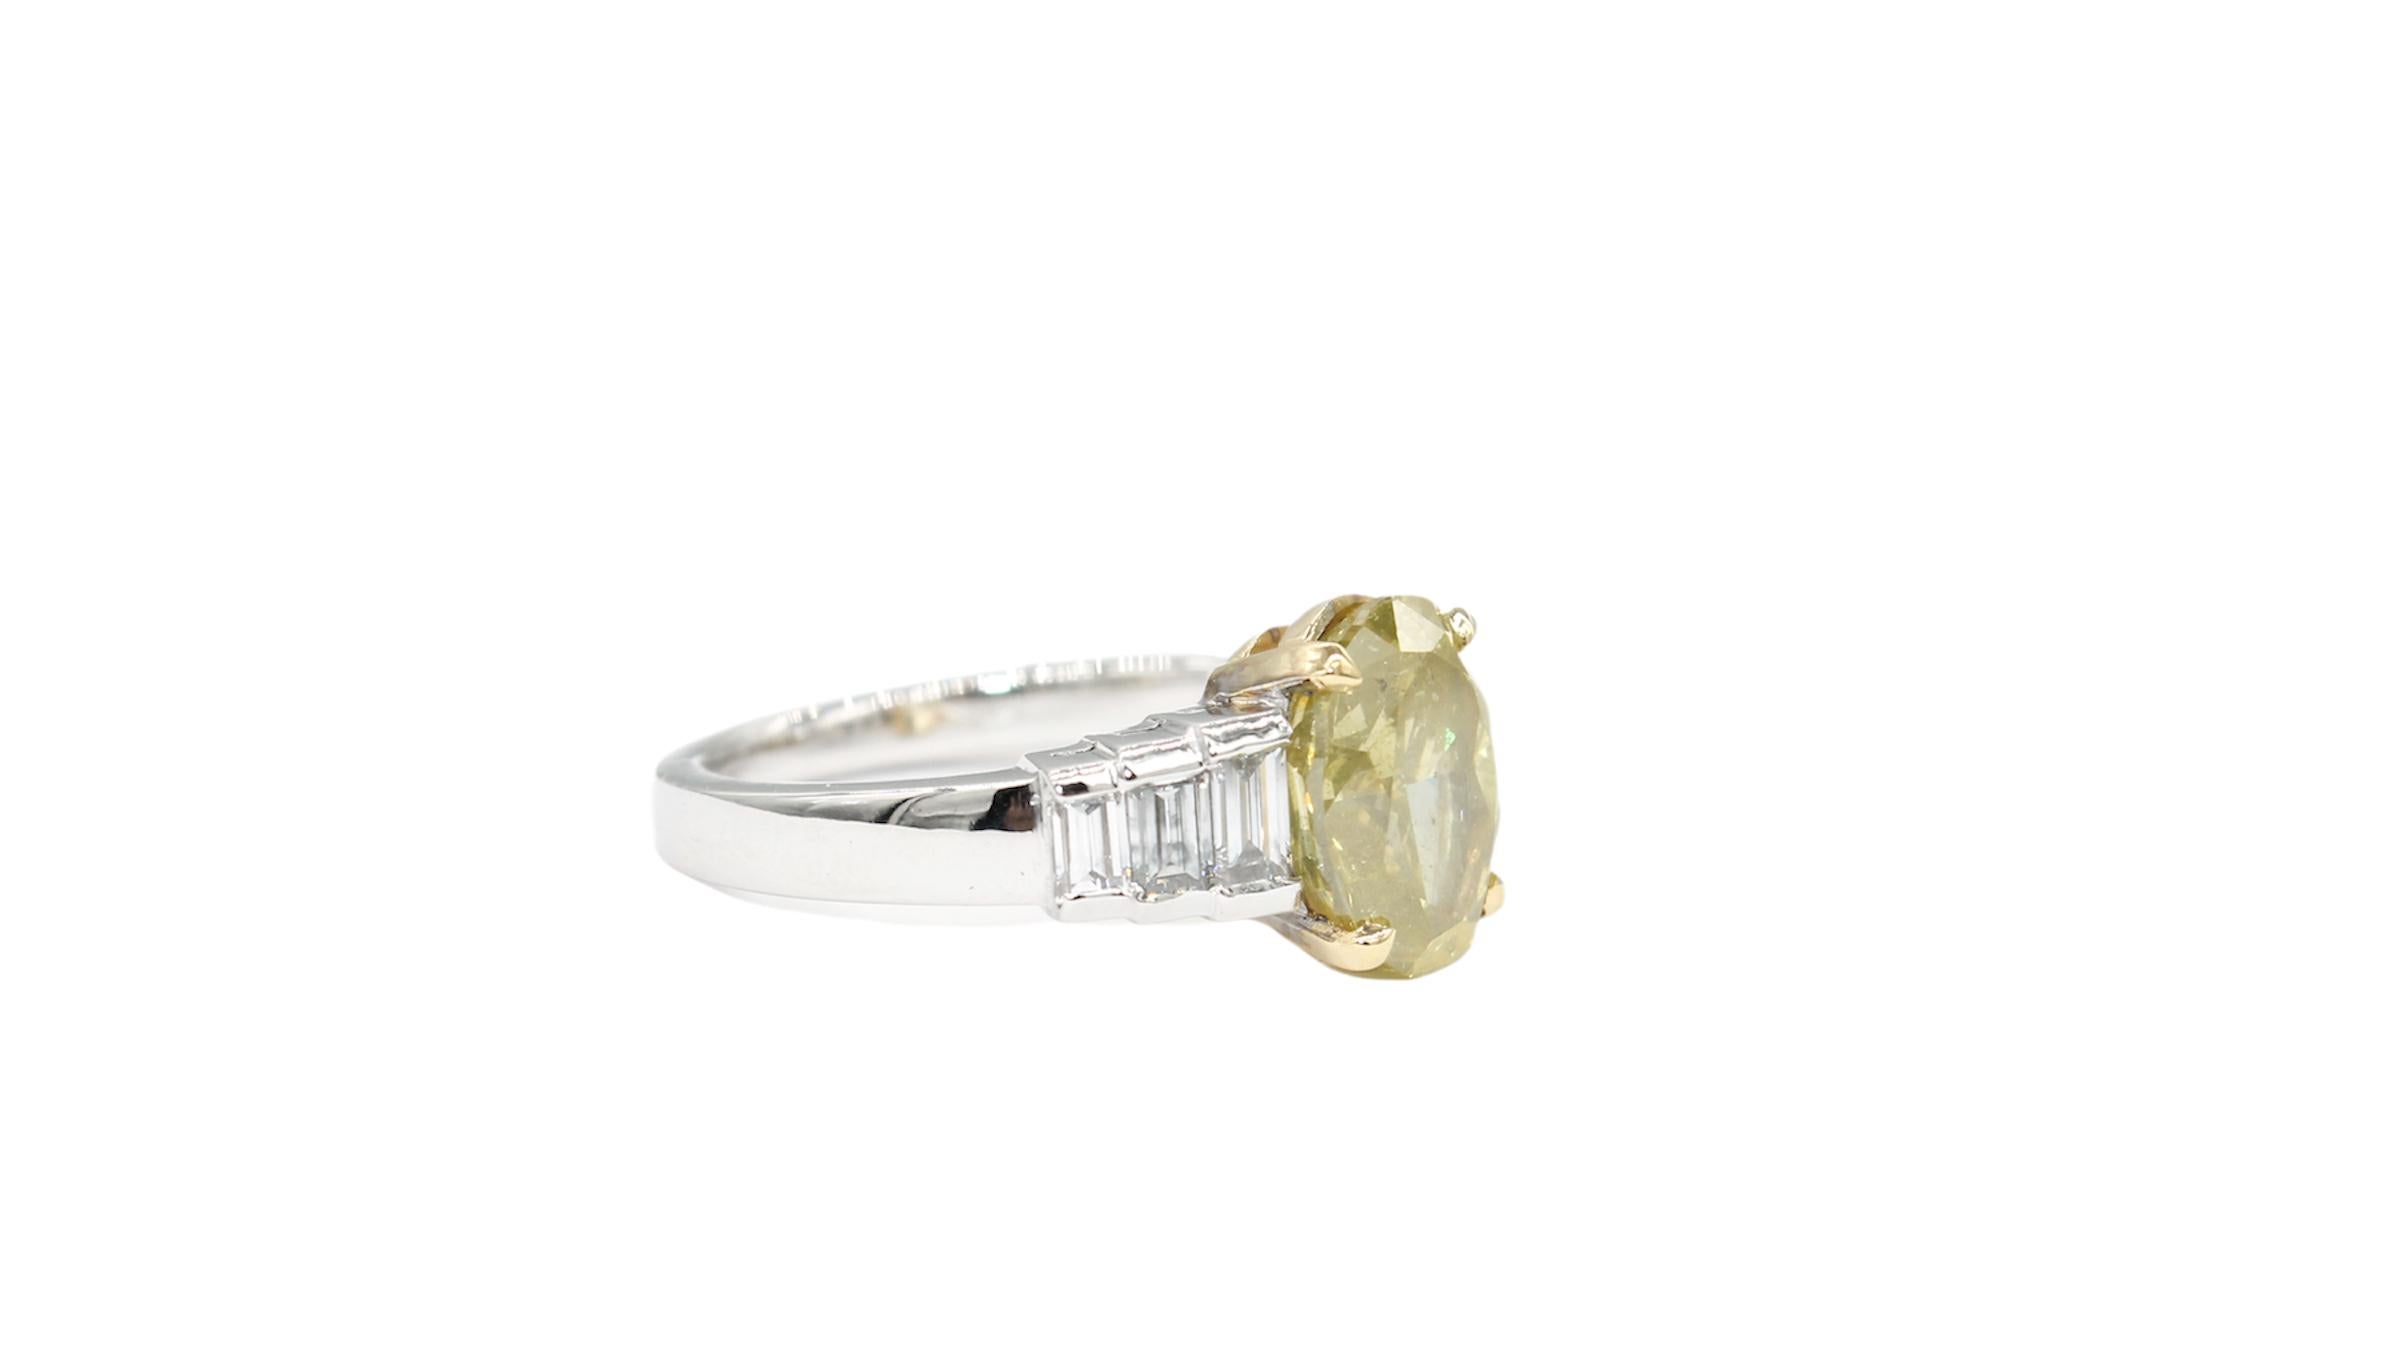 18K white-Gold ring. Modern Ring set with a Yellow diamond of 3.51 Carats and 6 baguettes shape diamonds of 0,78 Carats ( H color - Vs clarity). this rade has been made by our craftsmen in Antwerp, Belgium. The diamonds come directly from Antwerp,